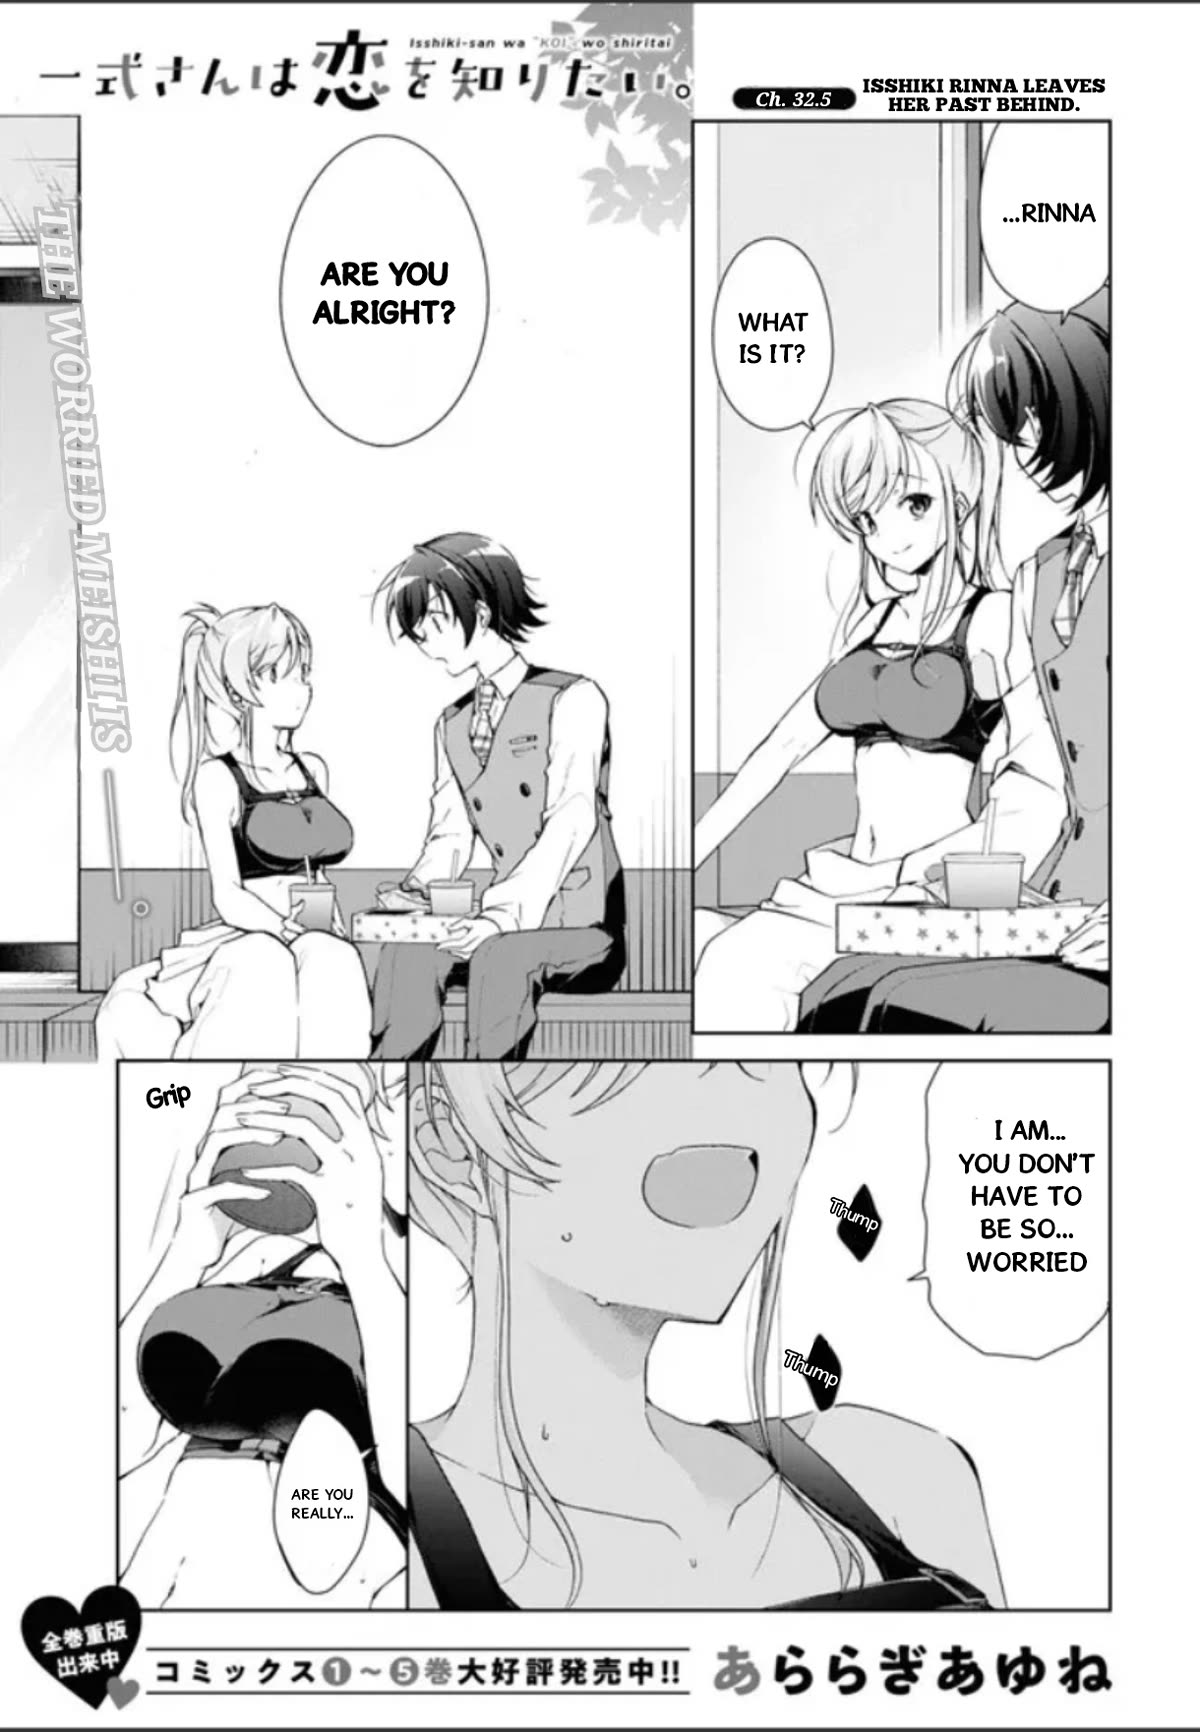 Isshiki-san Wants to Know About Love. - chapter 32.5 - #2